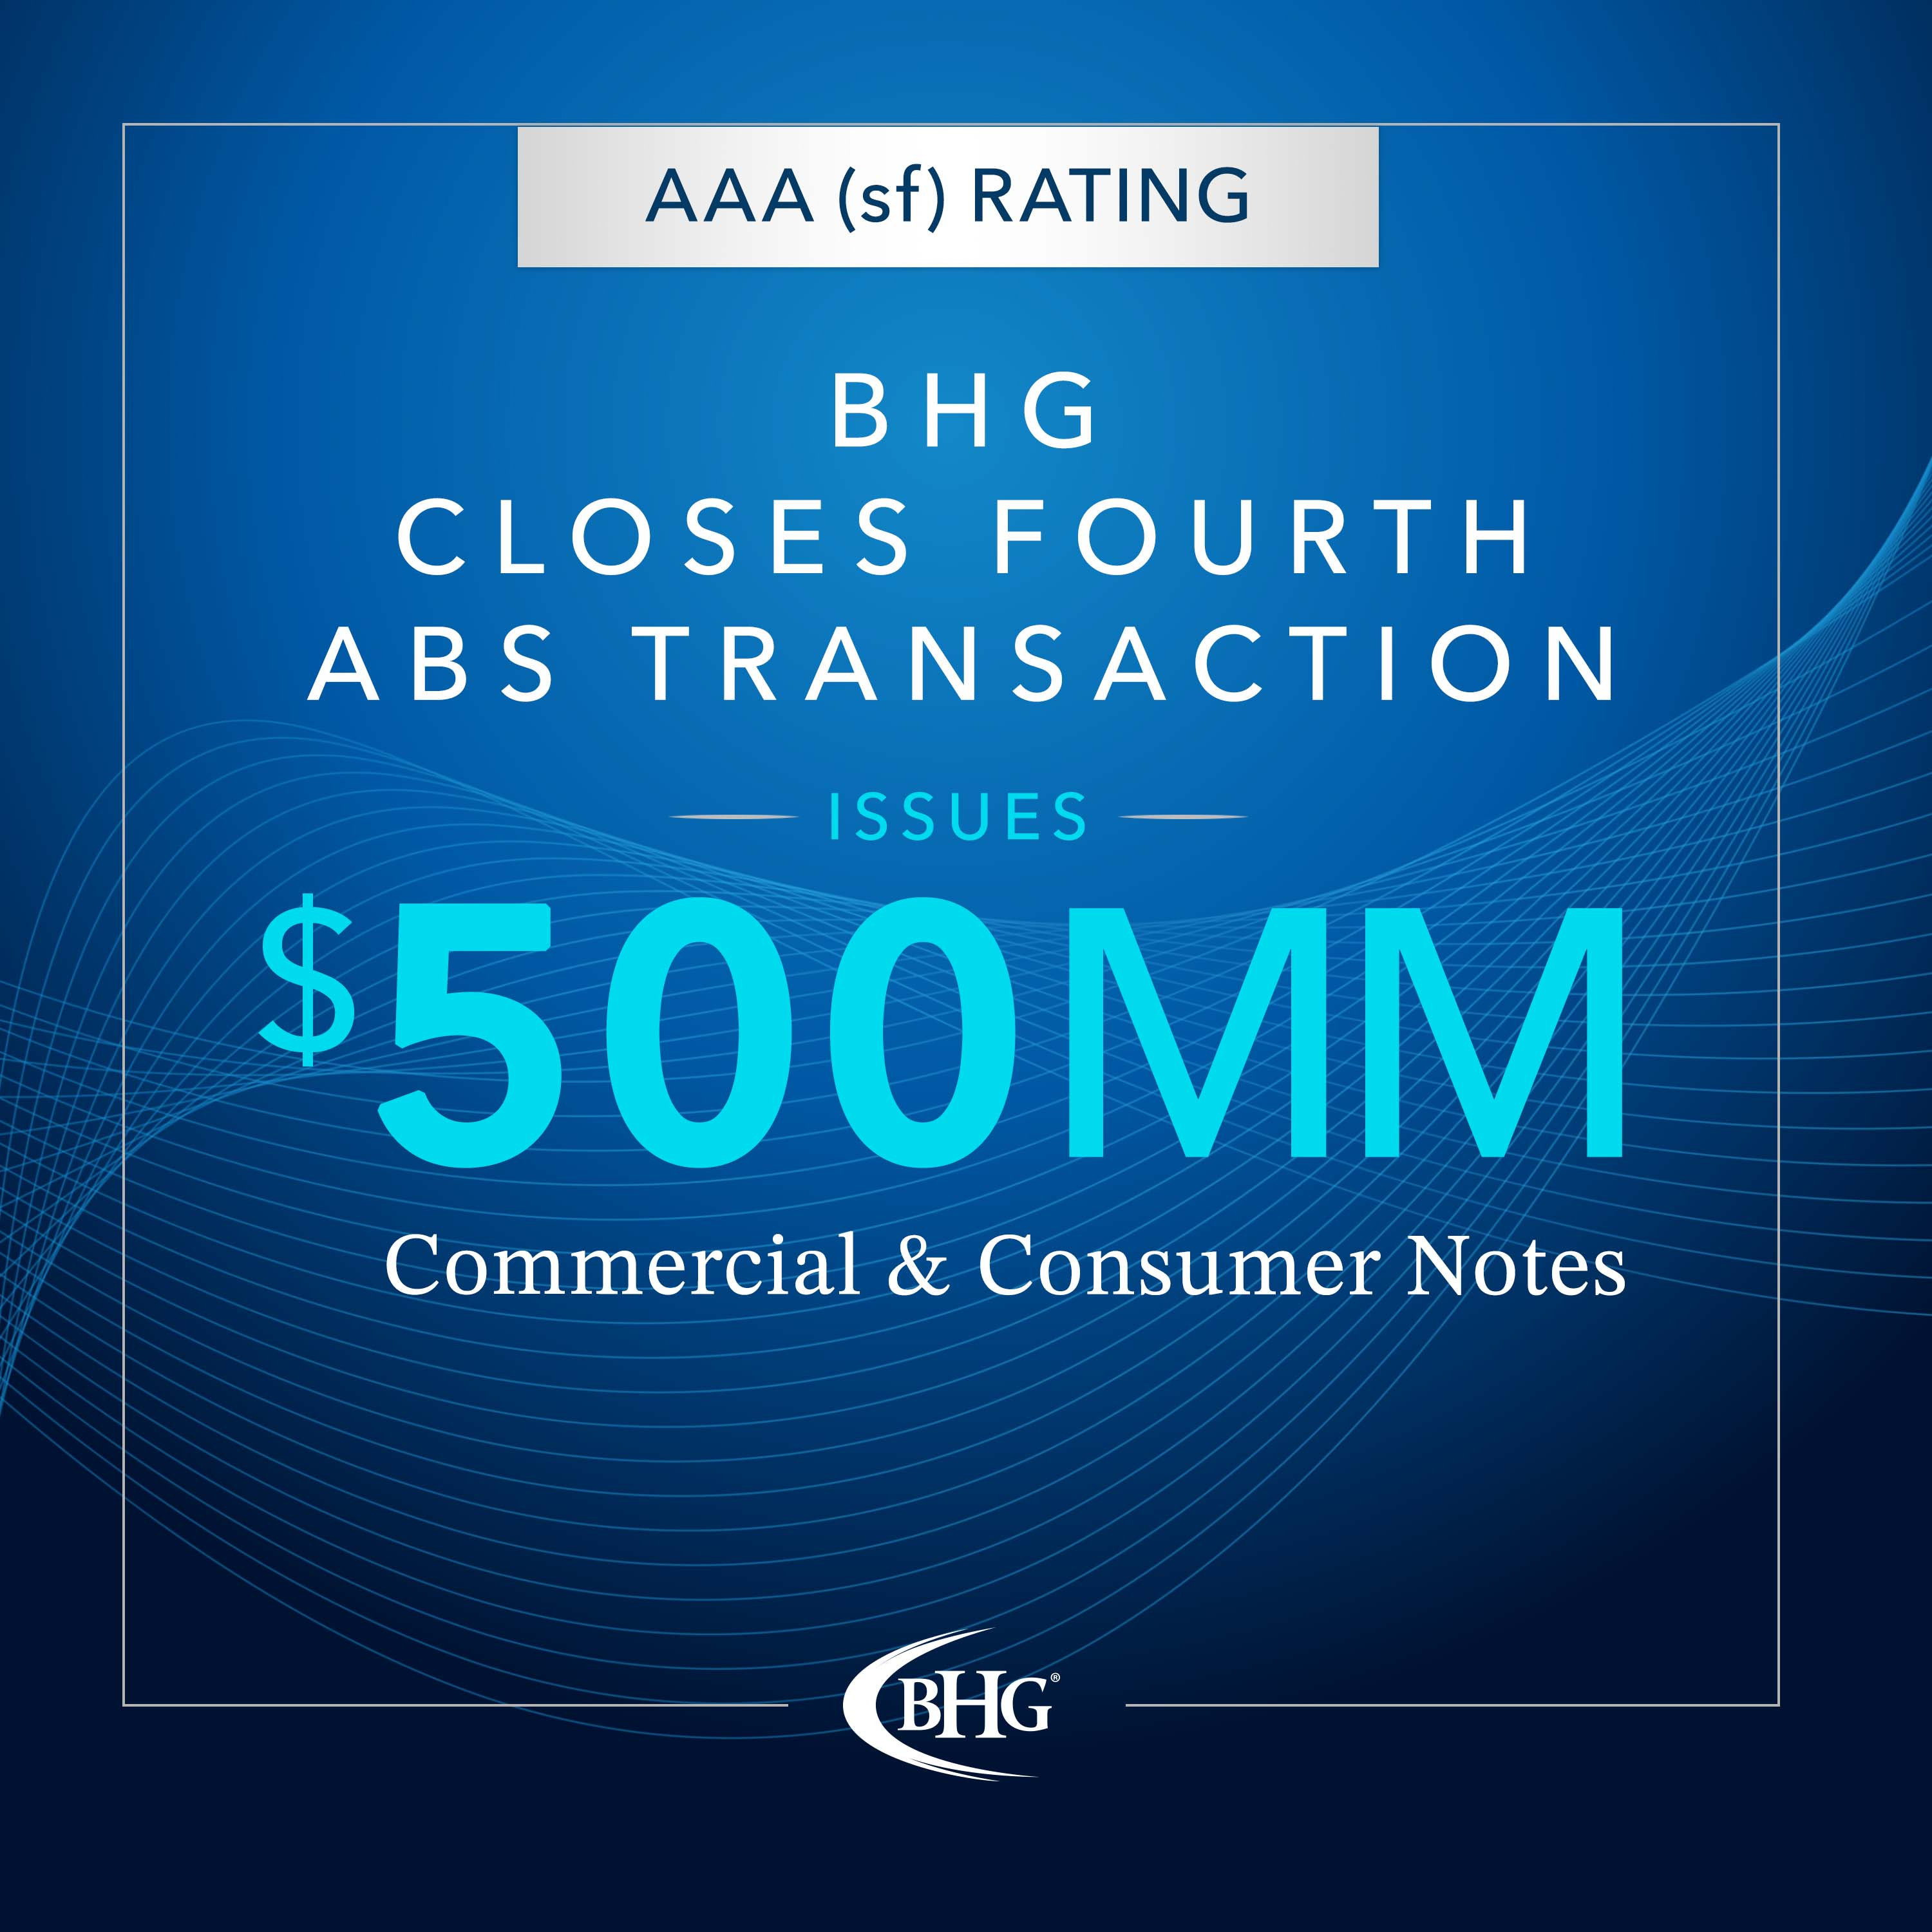 Kroll Bond Rating Agency, LLC (KBRA) issued a rating of ‘AAA (sf)’ for BHG 2022-A’s Class A Notes, in line with the senior tranche rating on BHG’s preceding transaction, BHG 2021-B, which closed in September of last year. In January, KBRA published upgraded ratings for two classes of notes in BHG’s inaugural transaction, BHG 2020-A, with the Class A tranche being revised to ‘AAA (sf)’.